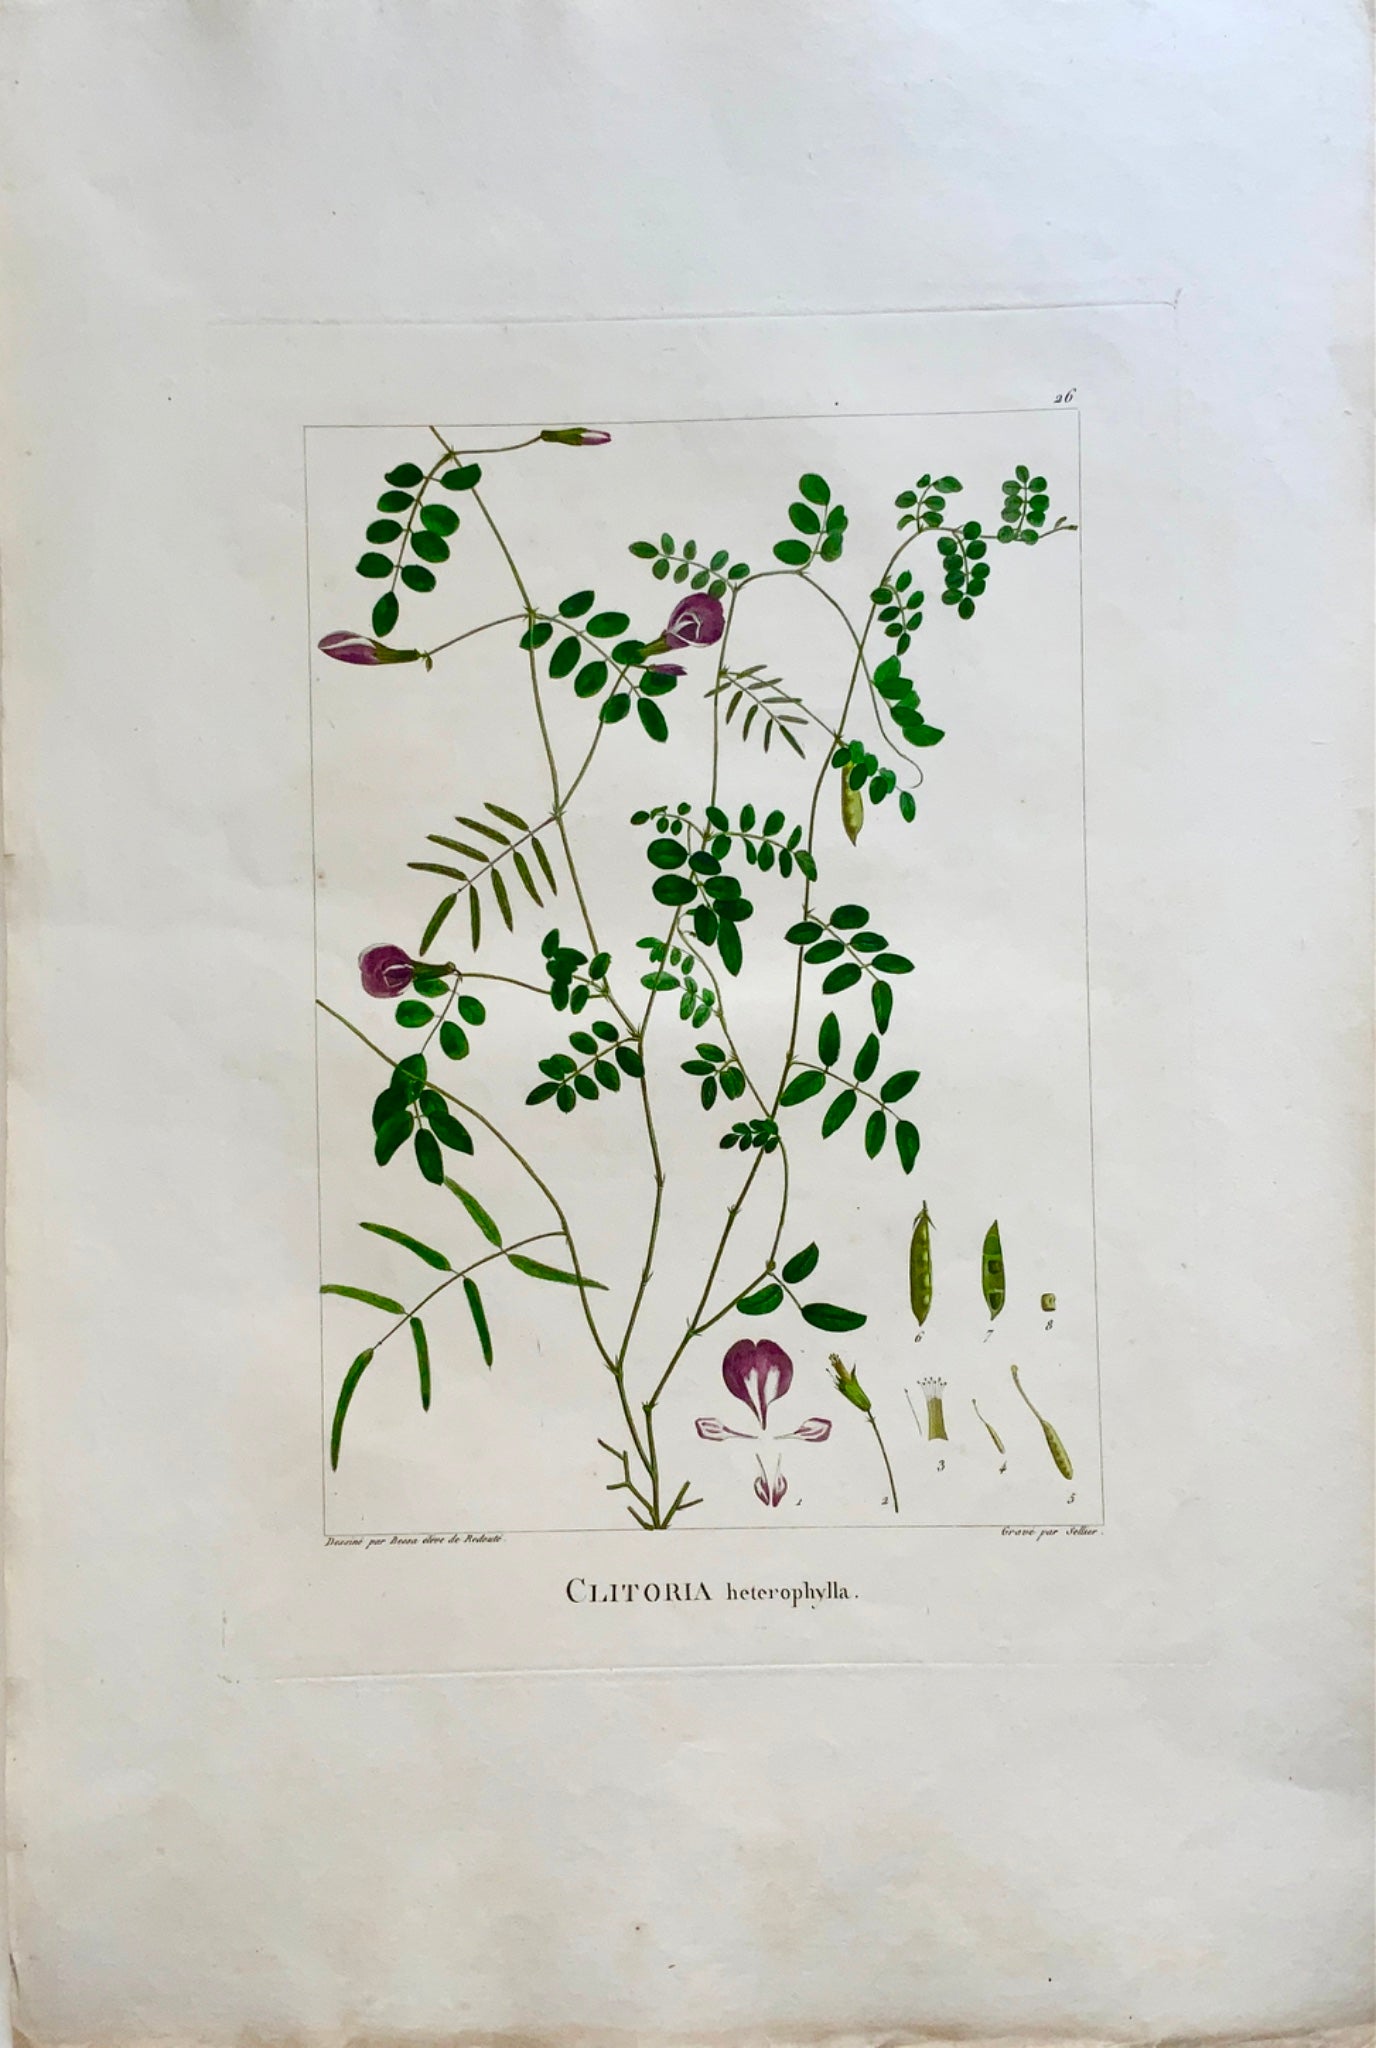 1803 Sellier after Bessa and Redoute - CLITORIA -  51 x 34 cm. Hand coloured - Botany